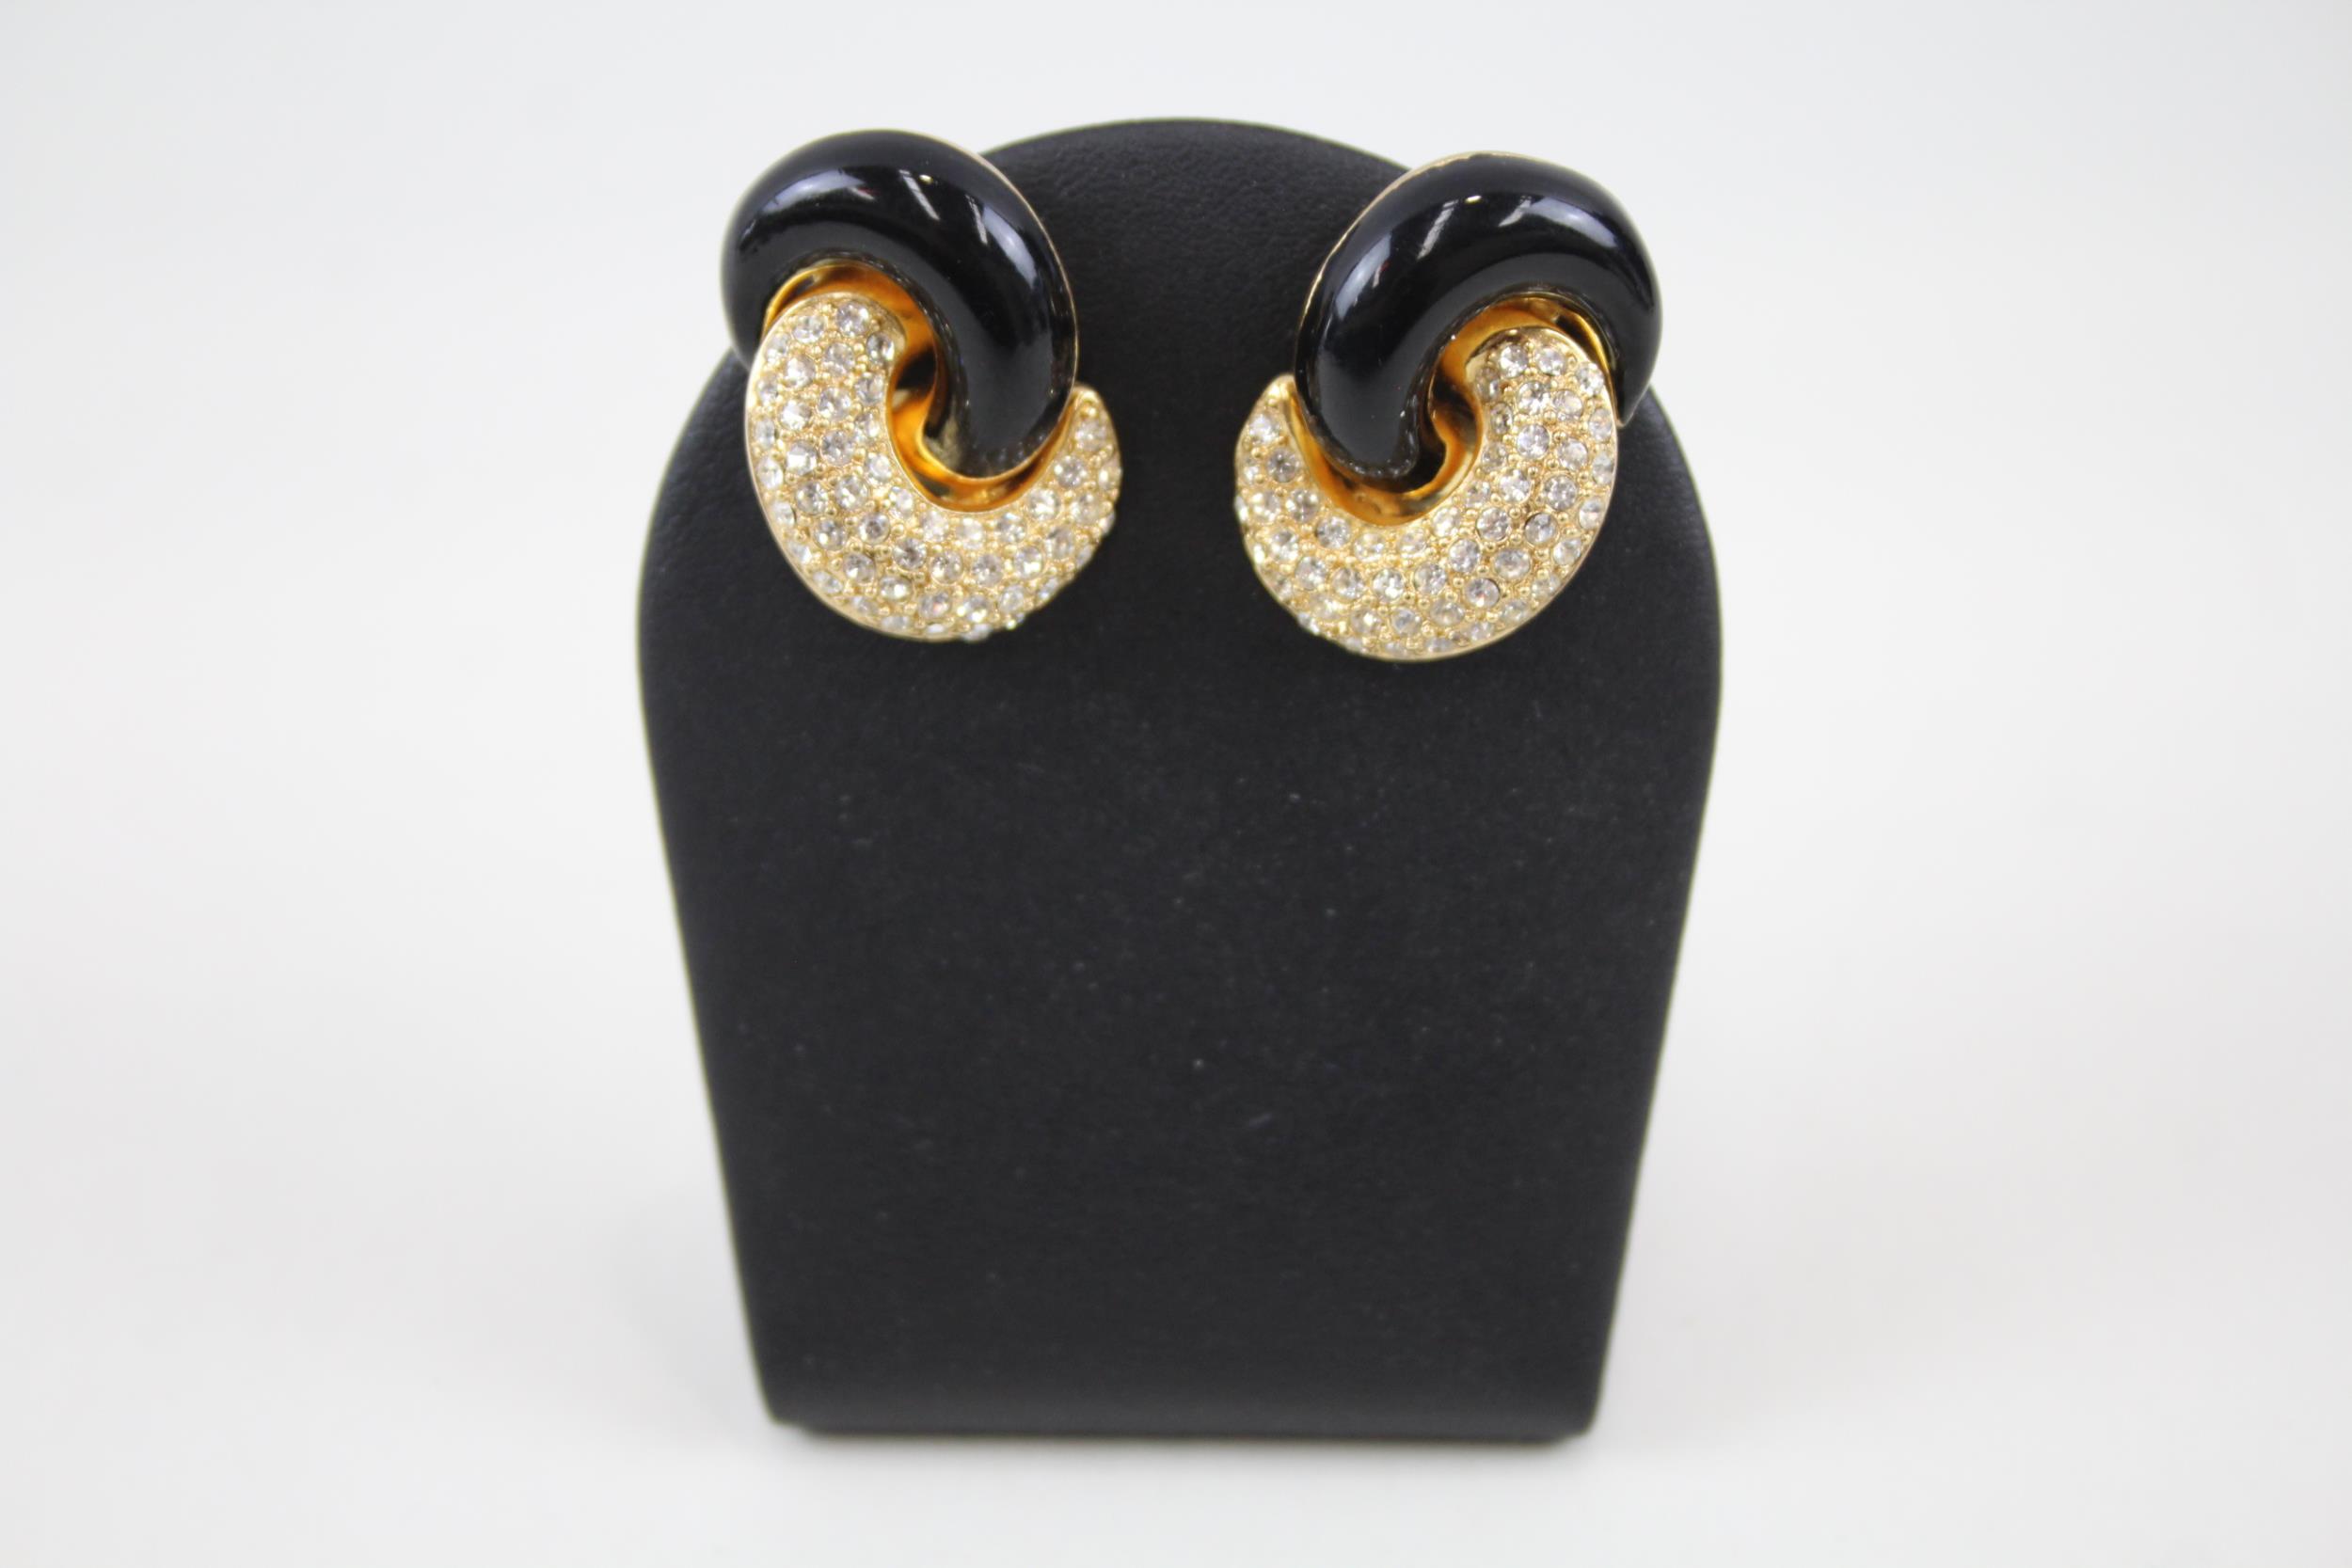 Pair of gold tone enamel and rhinestone clip on earrings by designer Christian Dior (23g)